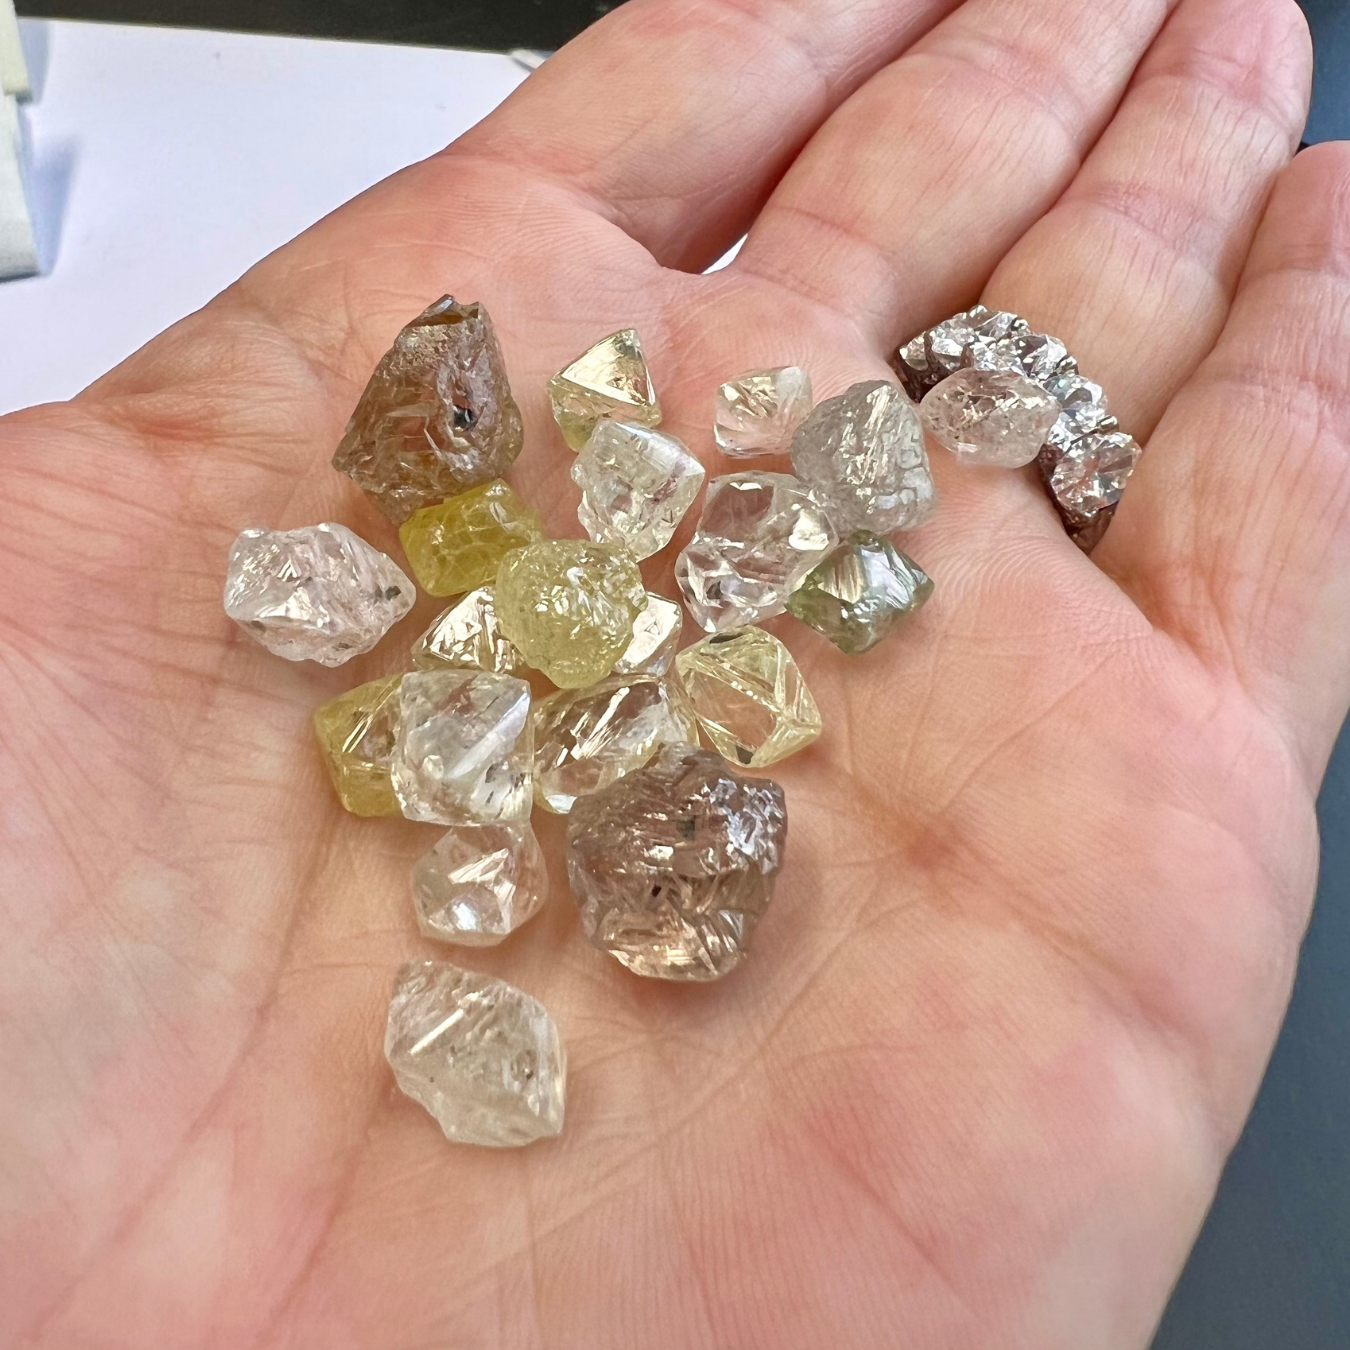 Banned the import of diamonds from Russia.